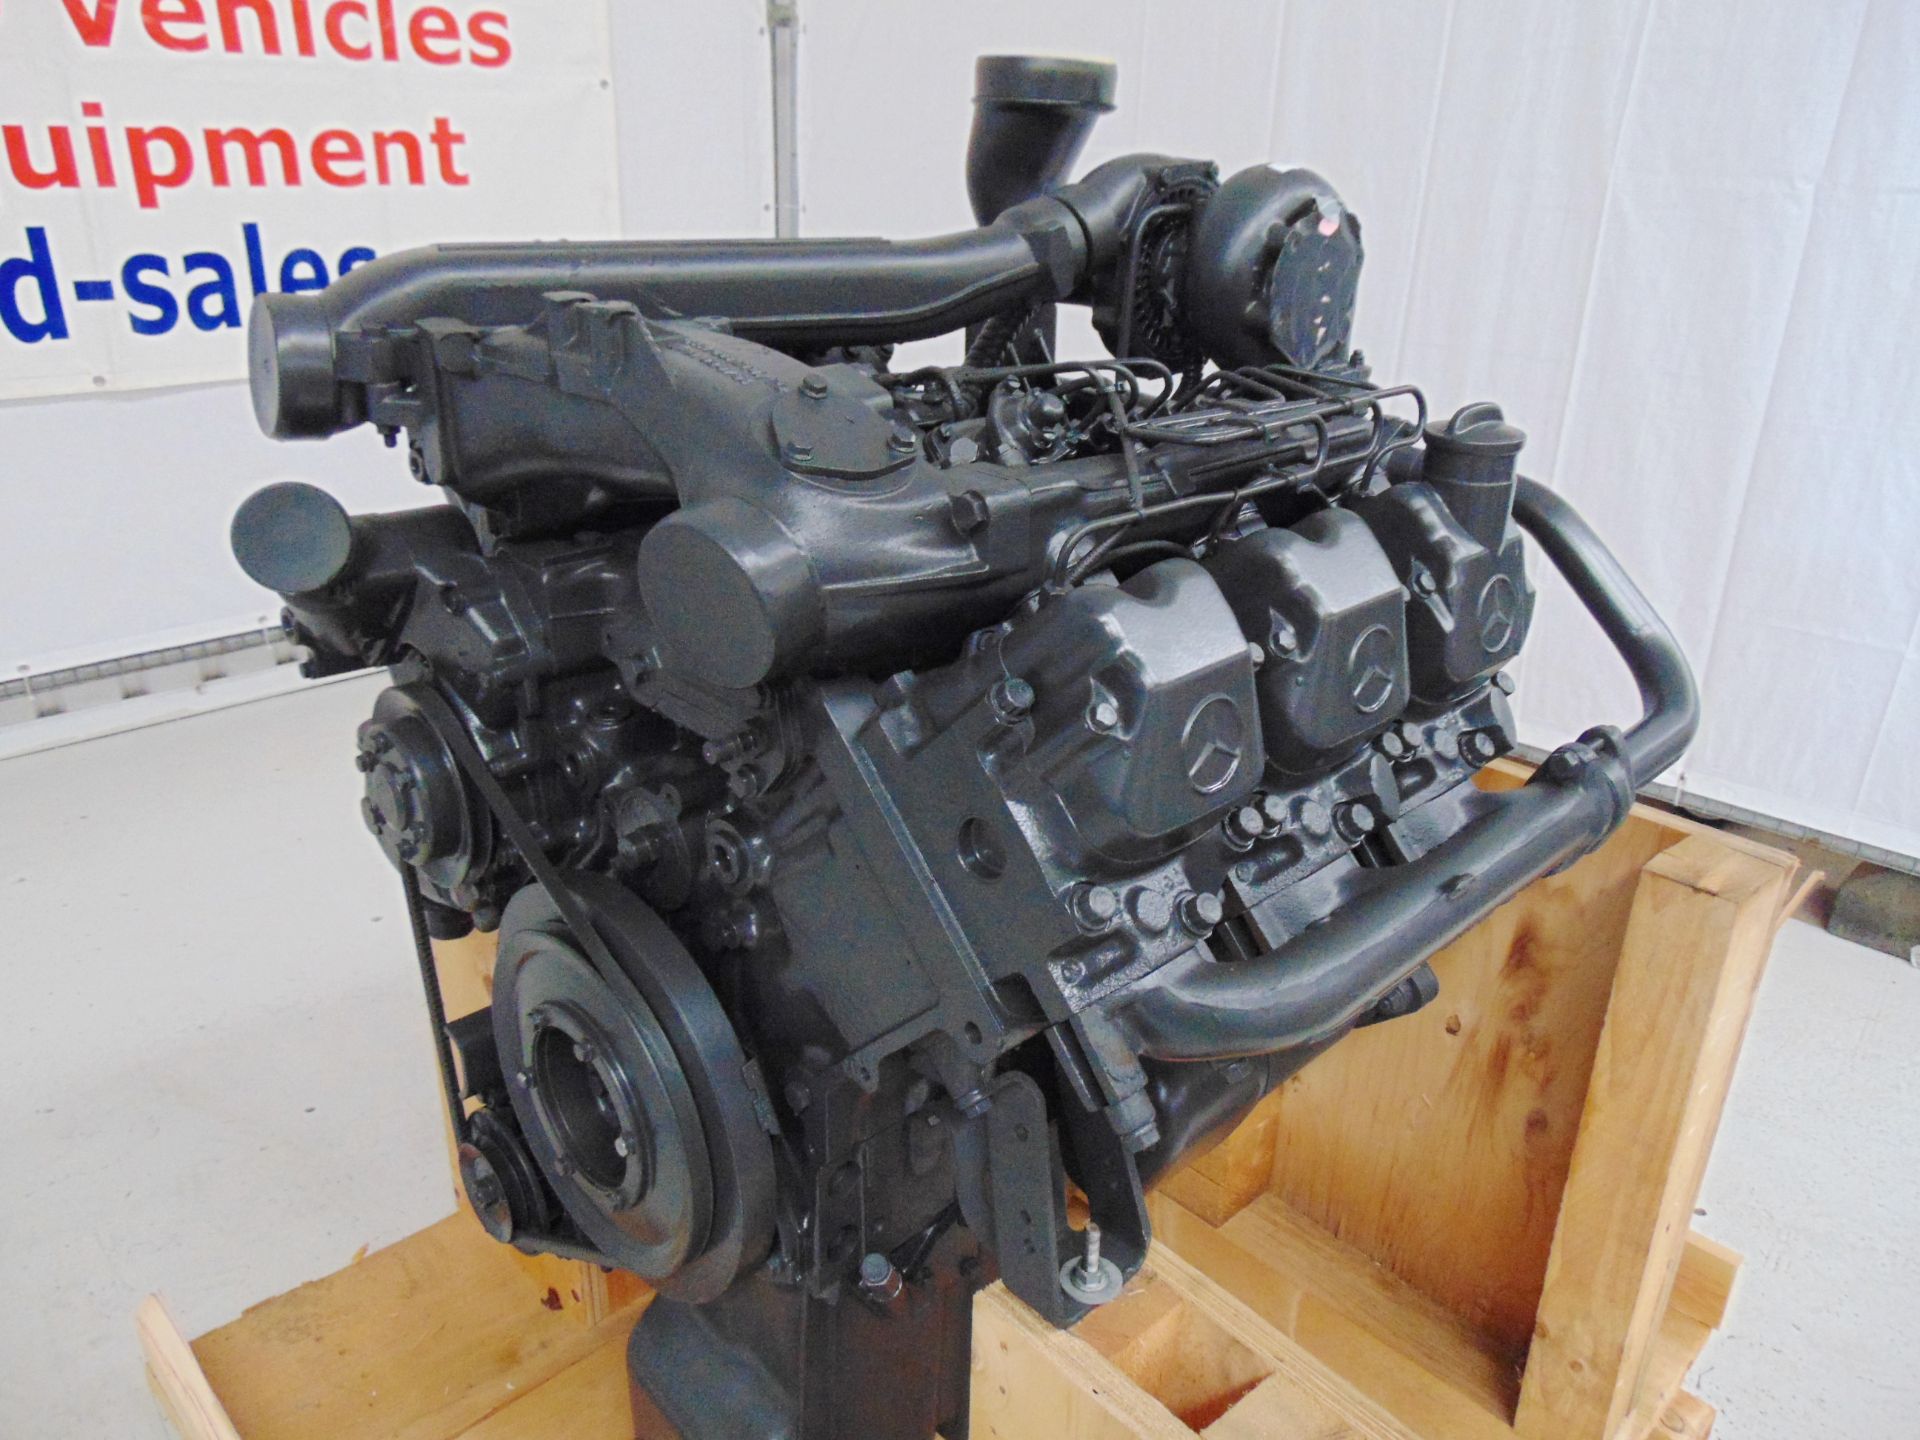 Factory Reconditioned Mercedes-Benz OM441 V6 Turbo Diesel Engine - Image 13 of 17